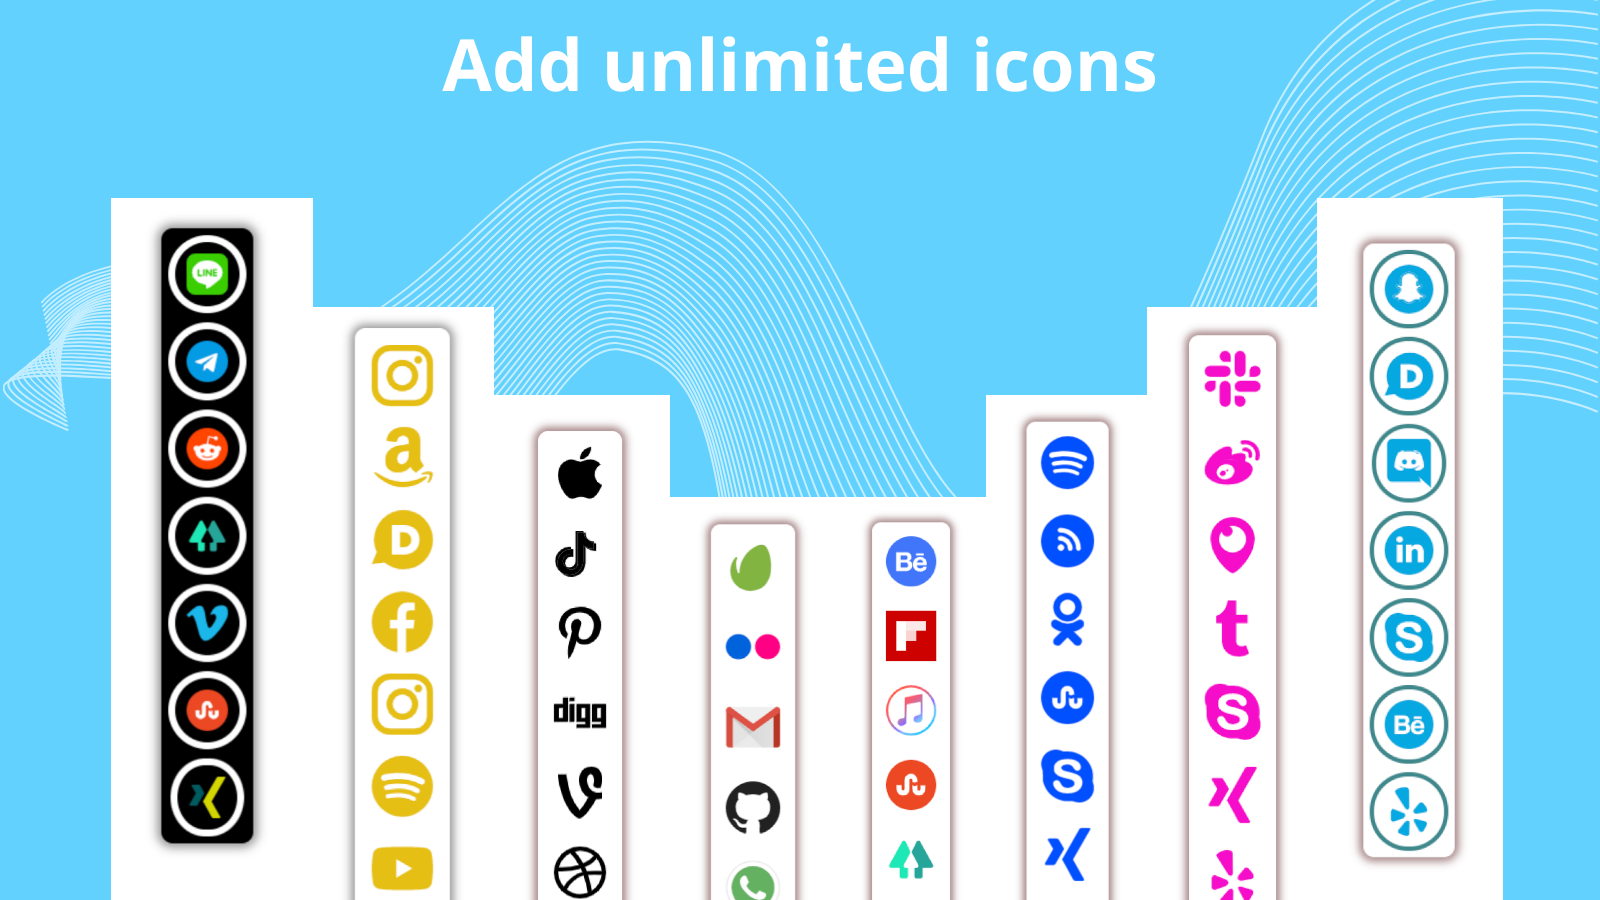 Add unlimited icons